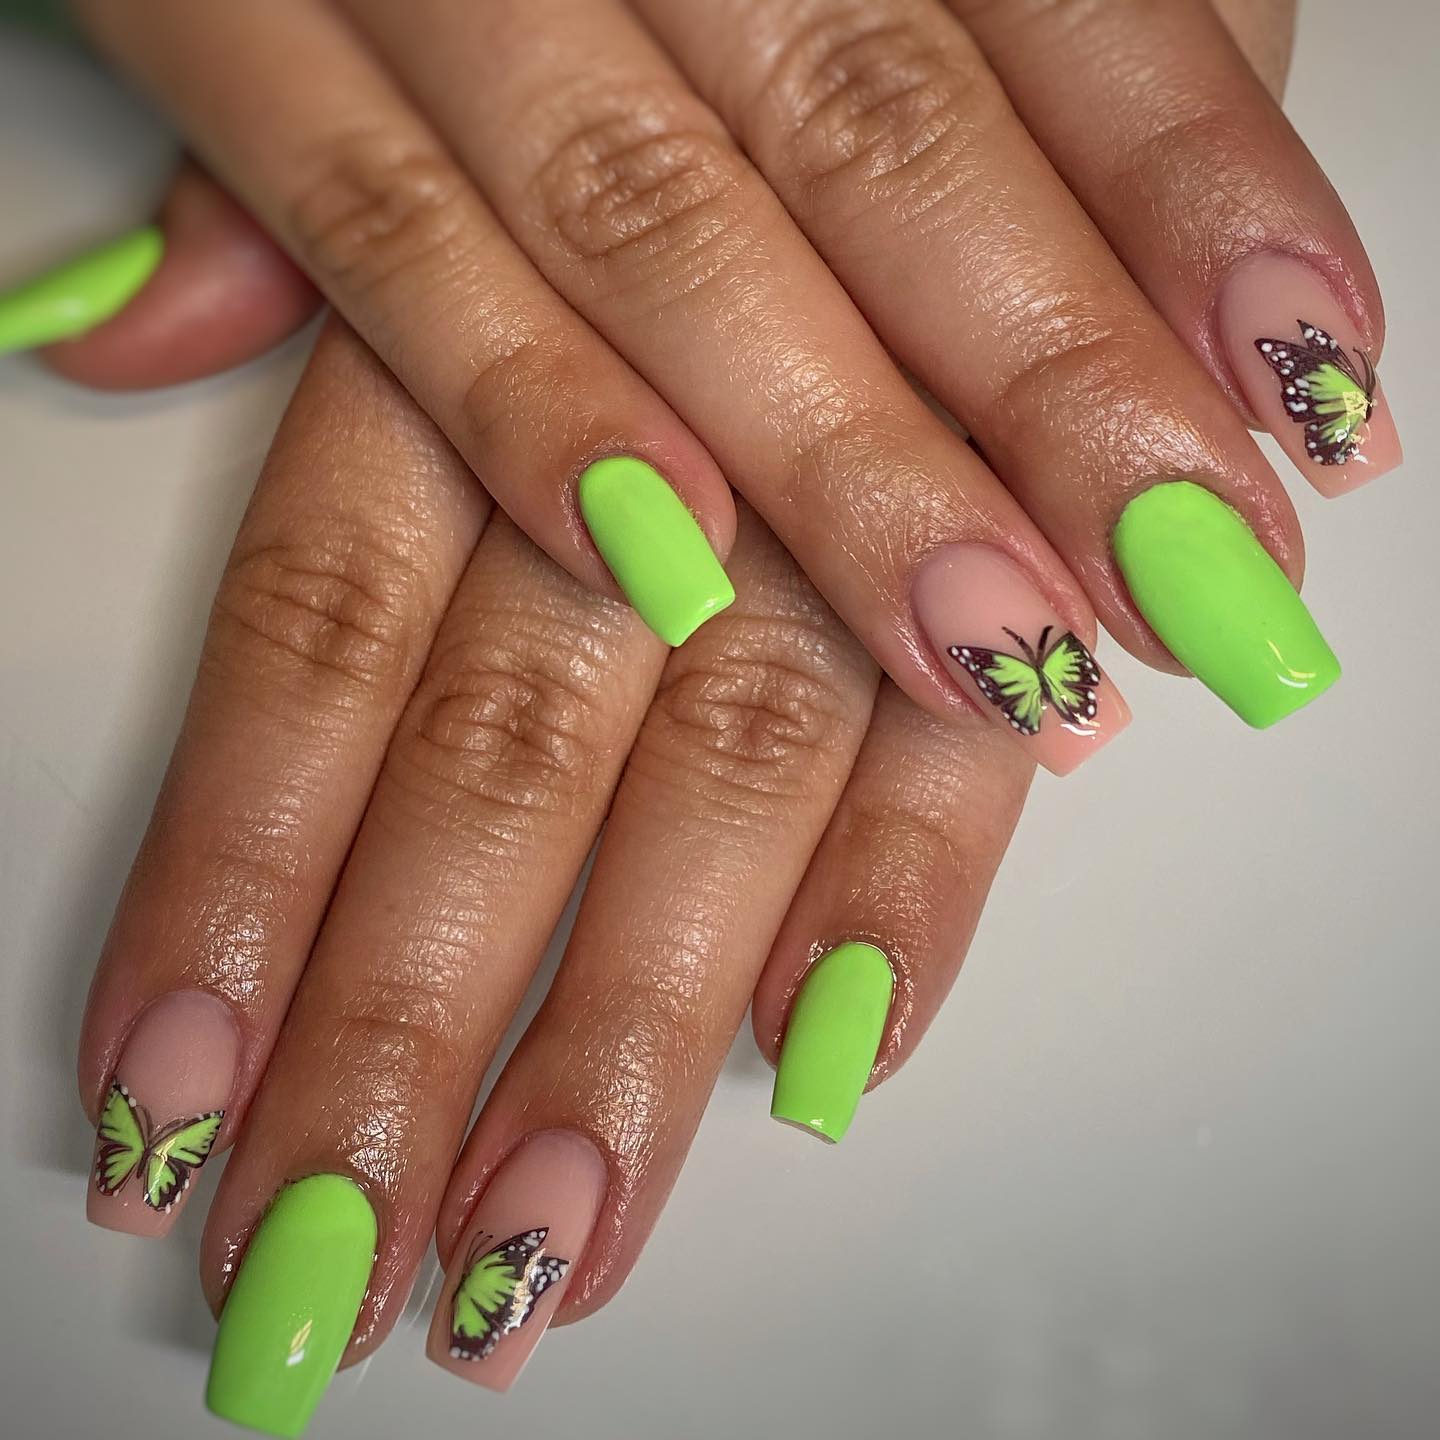 How sweet are these green little butterflies? This green color is on trend, so if you want some butterflies on your nails, you can use this shade of green.